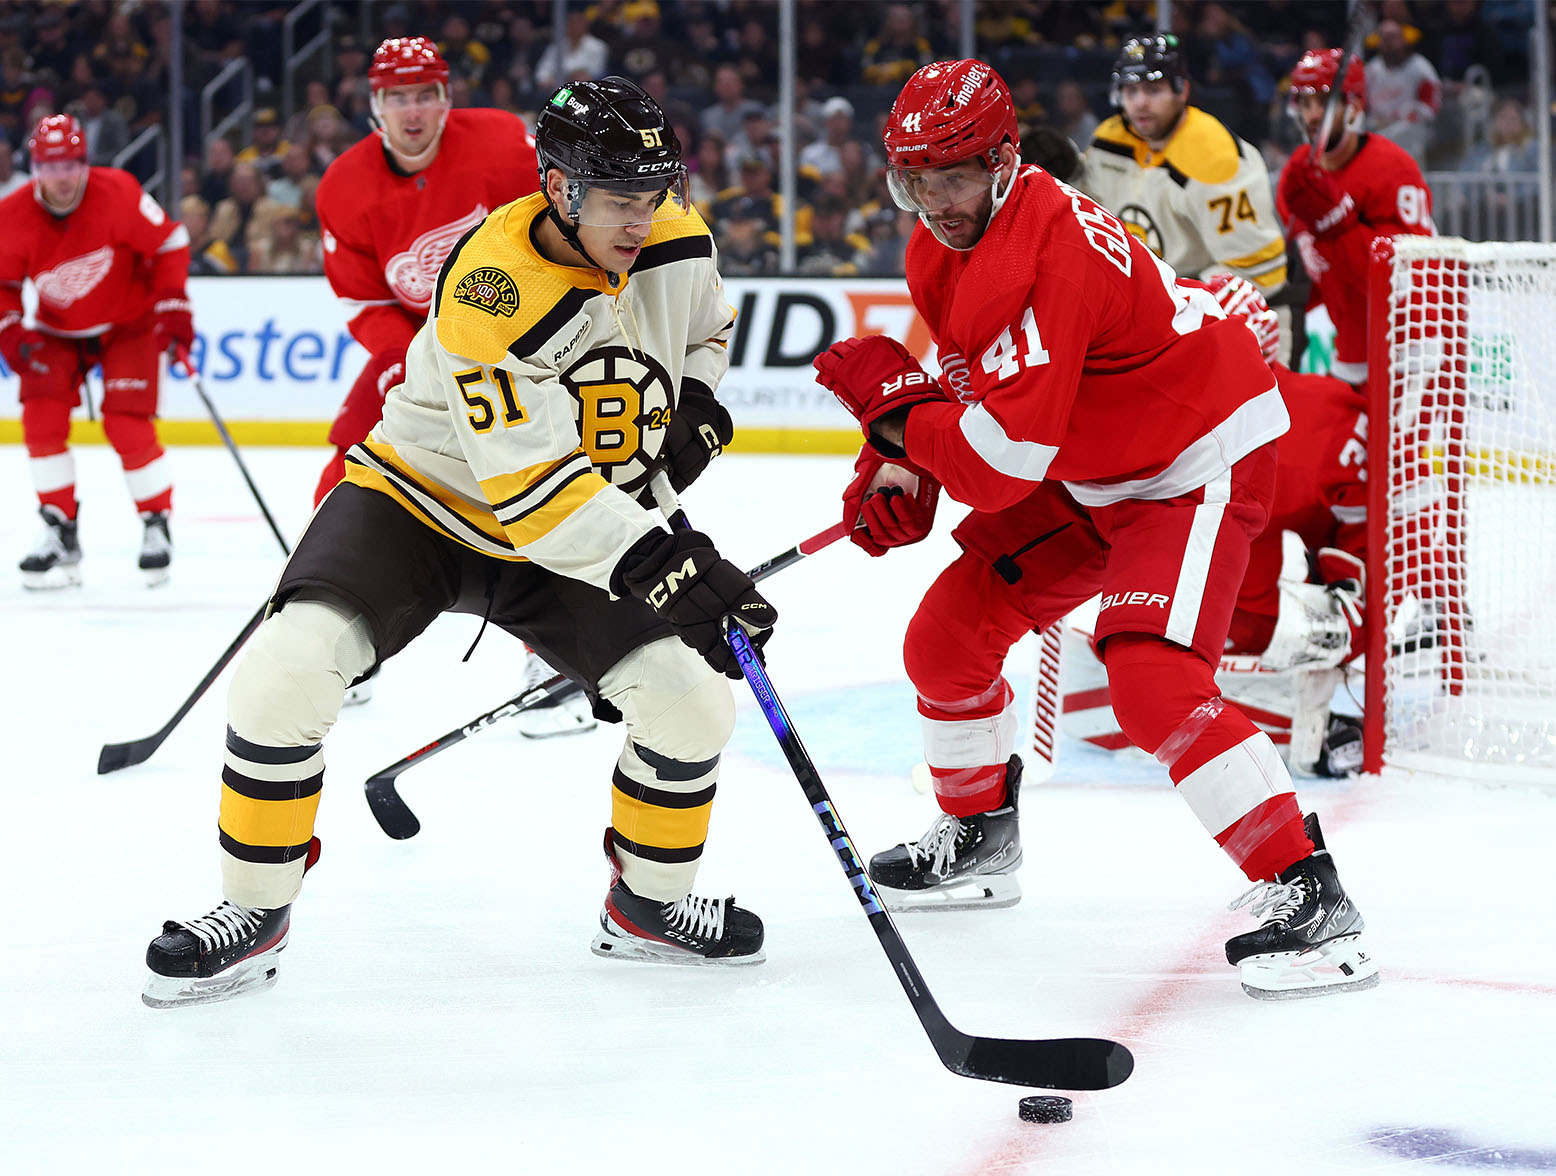 BOSTON, MASSACHUSETTS - OCTOBER 28: Matthew Poitras #51 of the Boston Bruins looks for a shot against Shayne Gostisbehere #41 of the Detroit Red Wings during the first period at TD Garden on October 28, 2023 in Boston, Massachusetts. (Photo by Maddie Meyer/Getty Images)